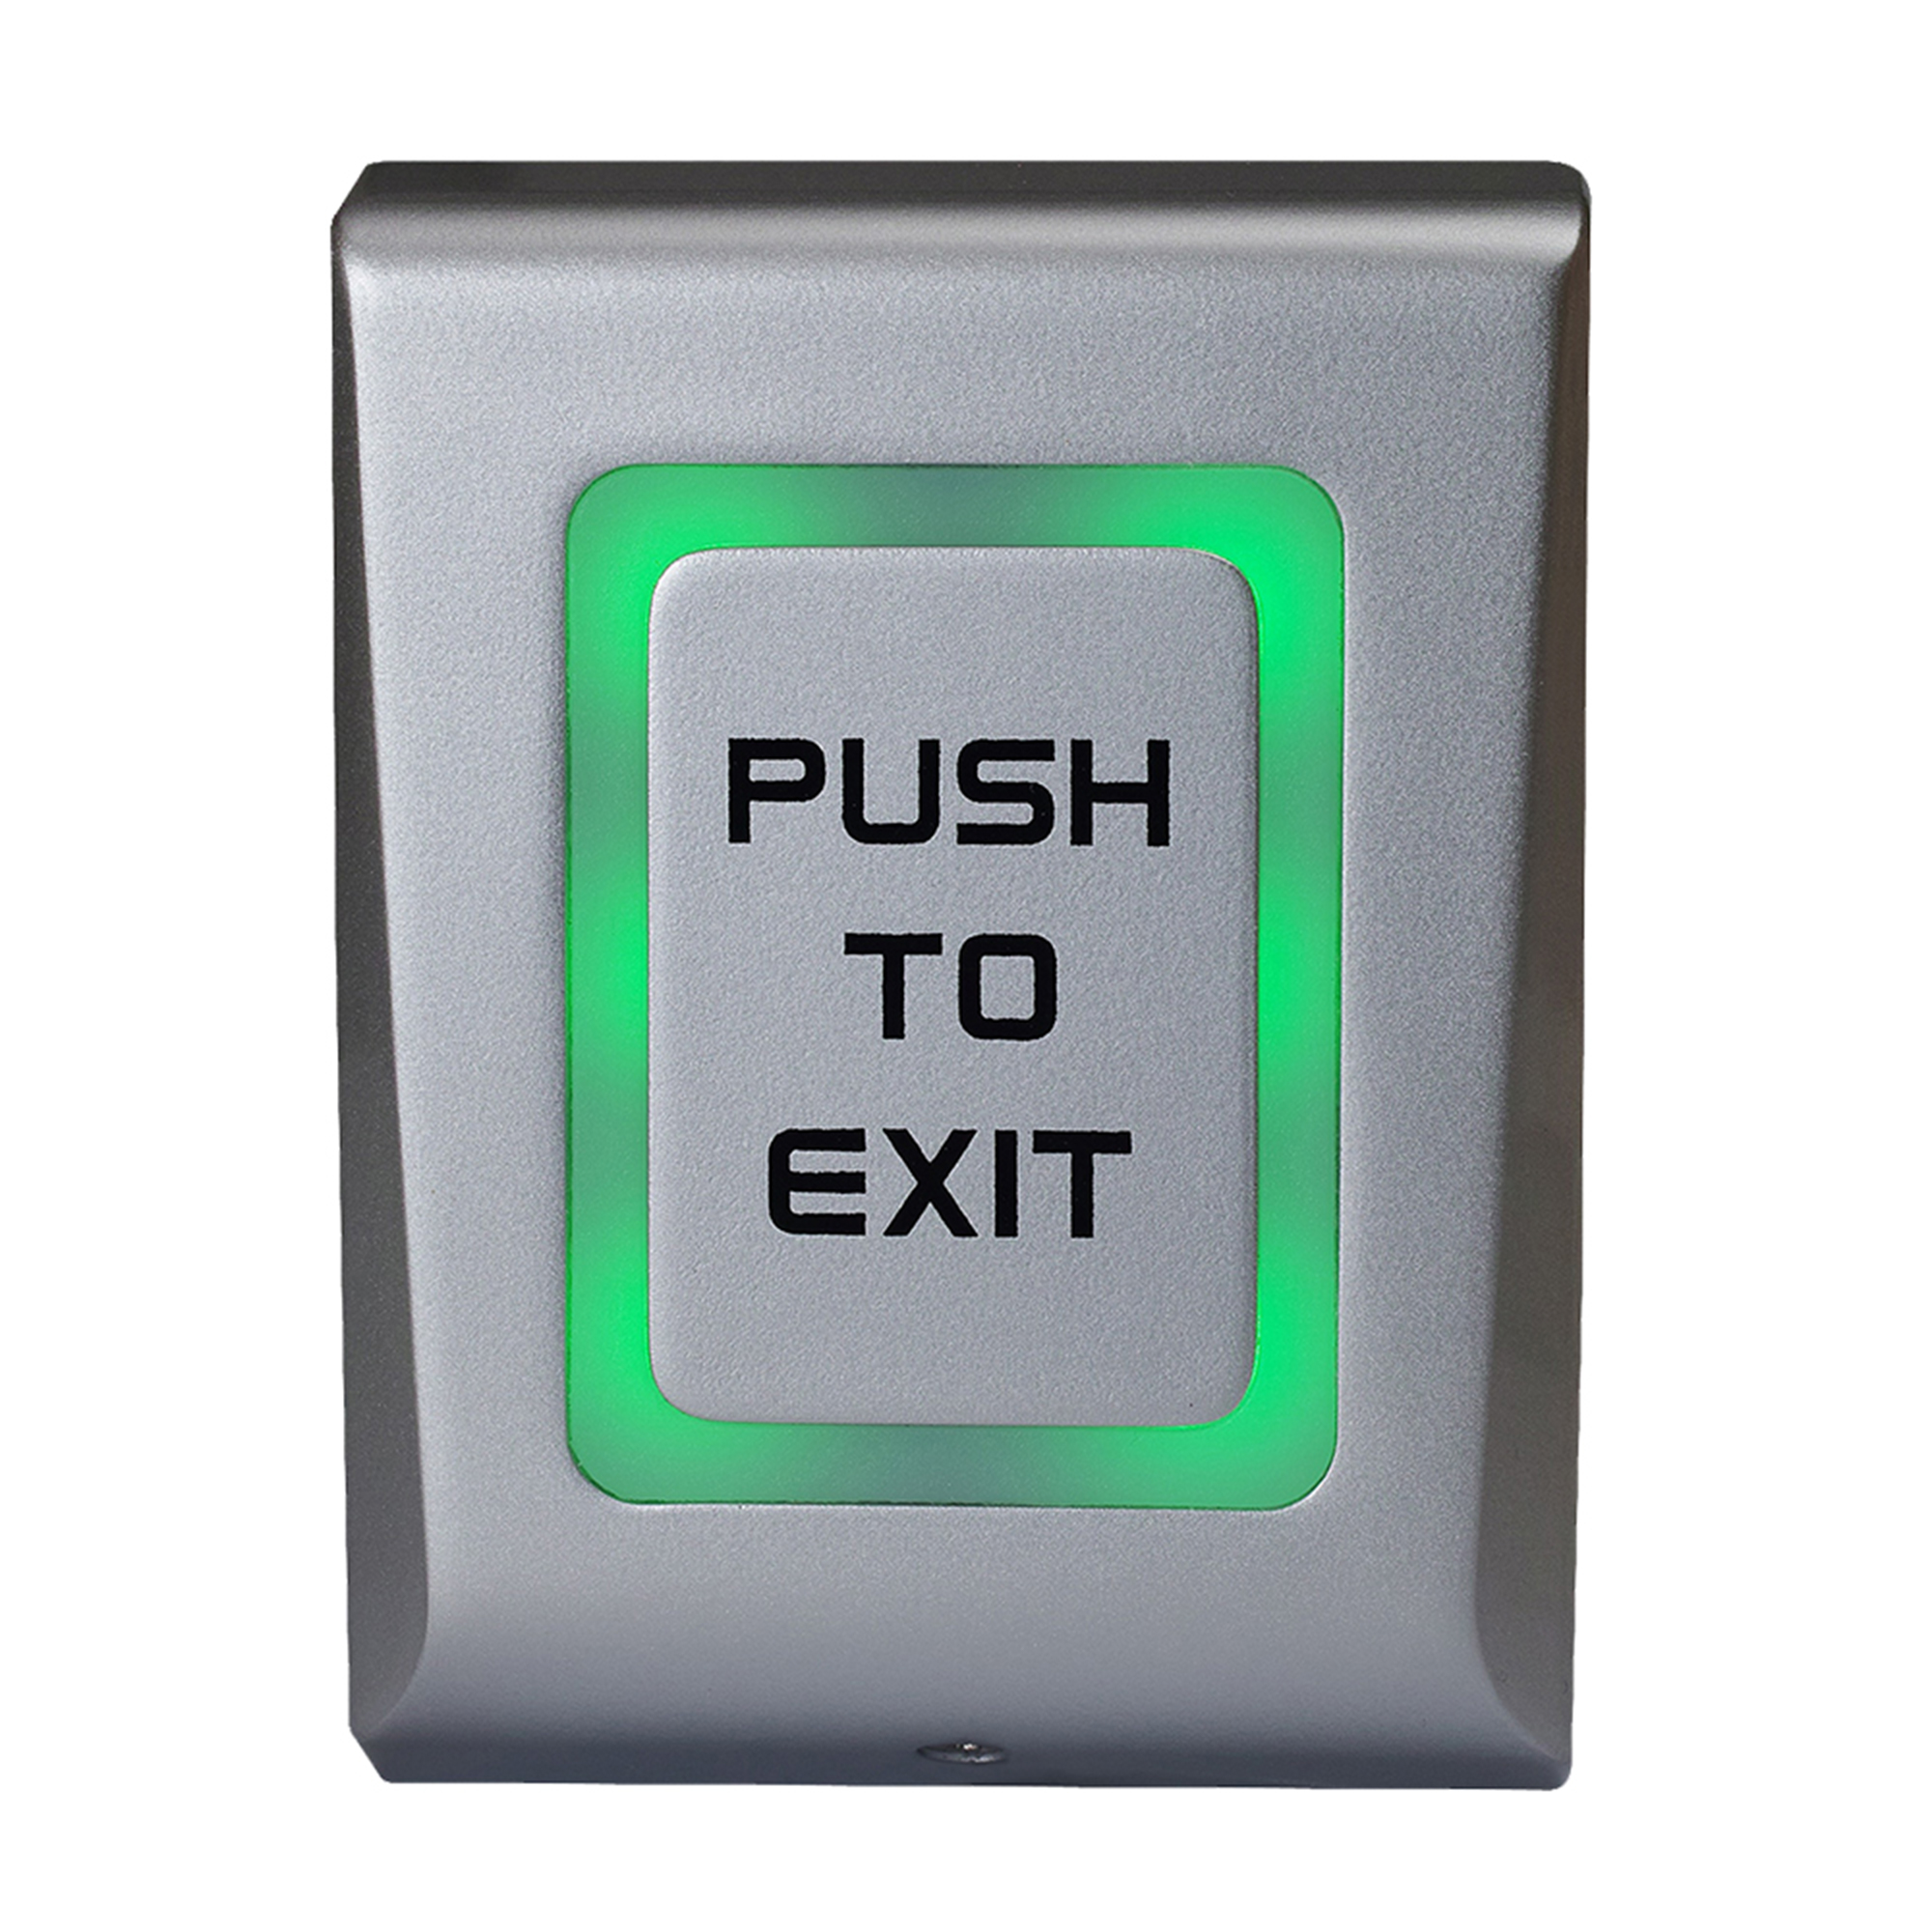 CM-26CB/4 - CM-25, CM-26CB & CM-35 Series: Narrow Push Plate Switches - All Active Switches - Door Activation Devices